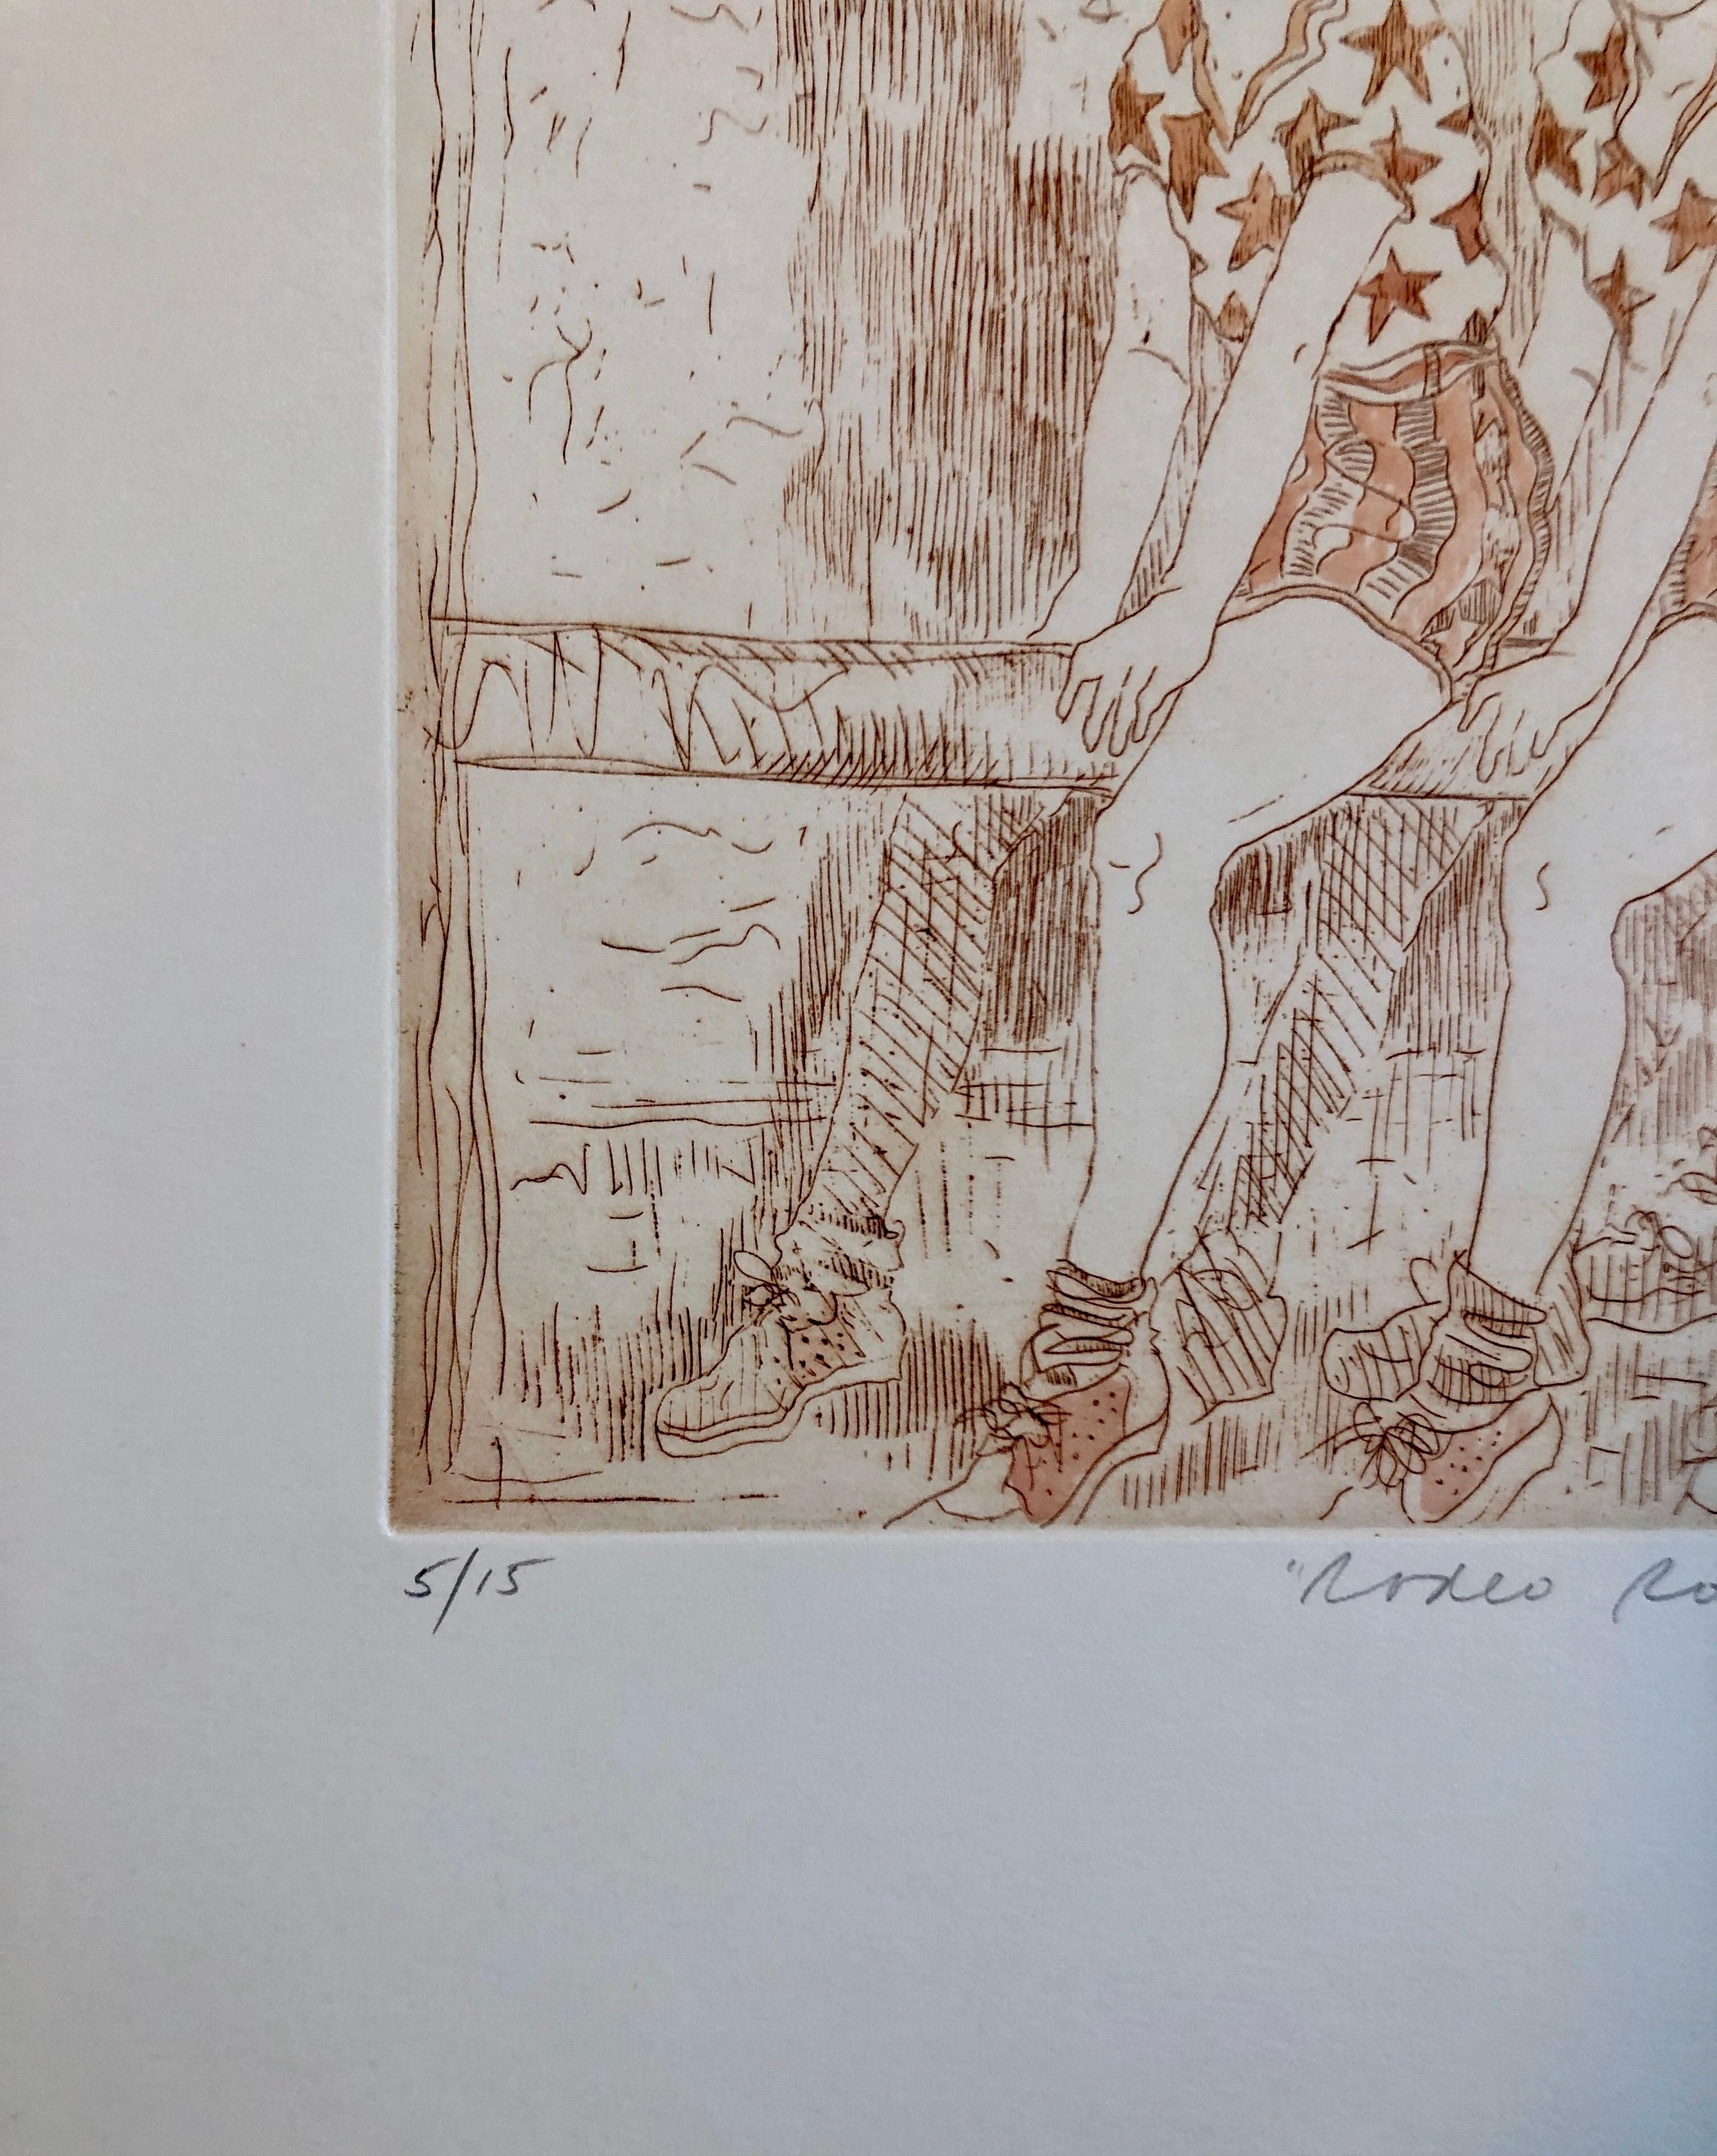 Titled: Rodeo rose
Ann Chernow (Connecticut b. 1936) etching. hand signed 'Ann Chernow' in pencil lower right. Numbered '5/15' in pencil lower left. Titled in pencil lower center. Sheet measures 18-in. x 24-in. 
Image is smaller. please see